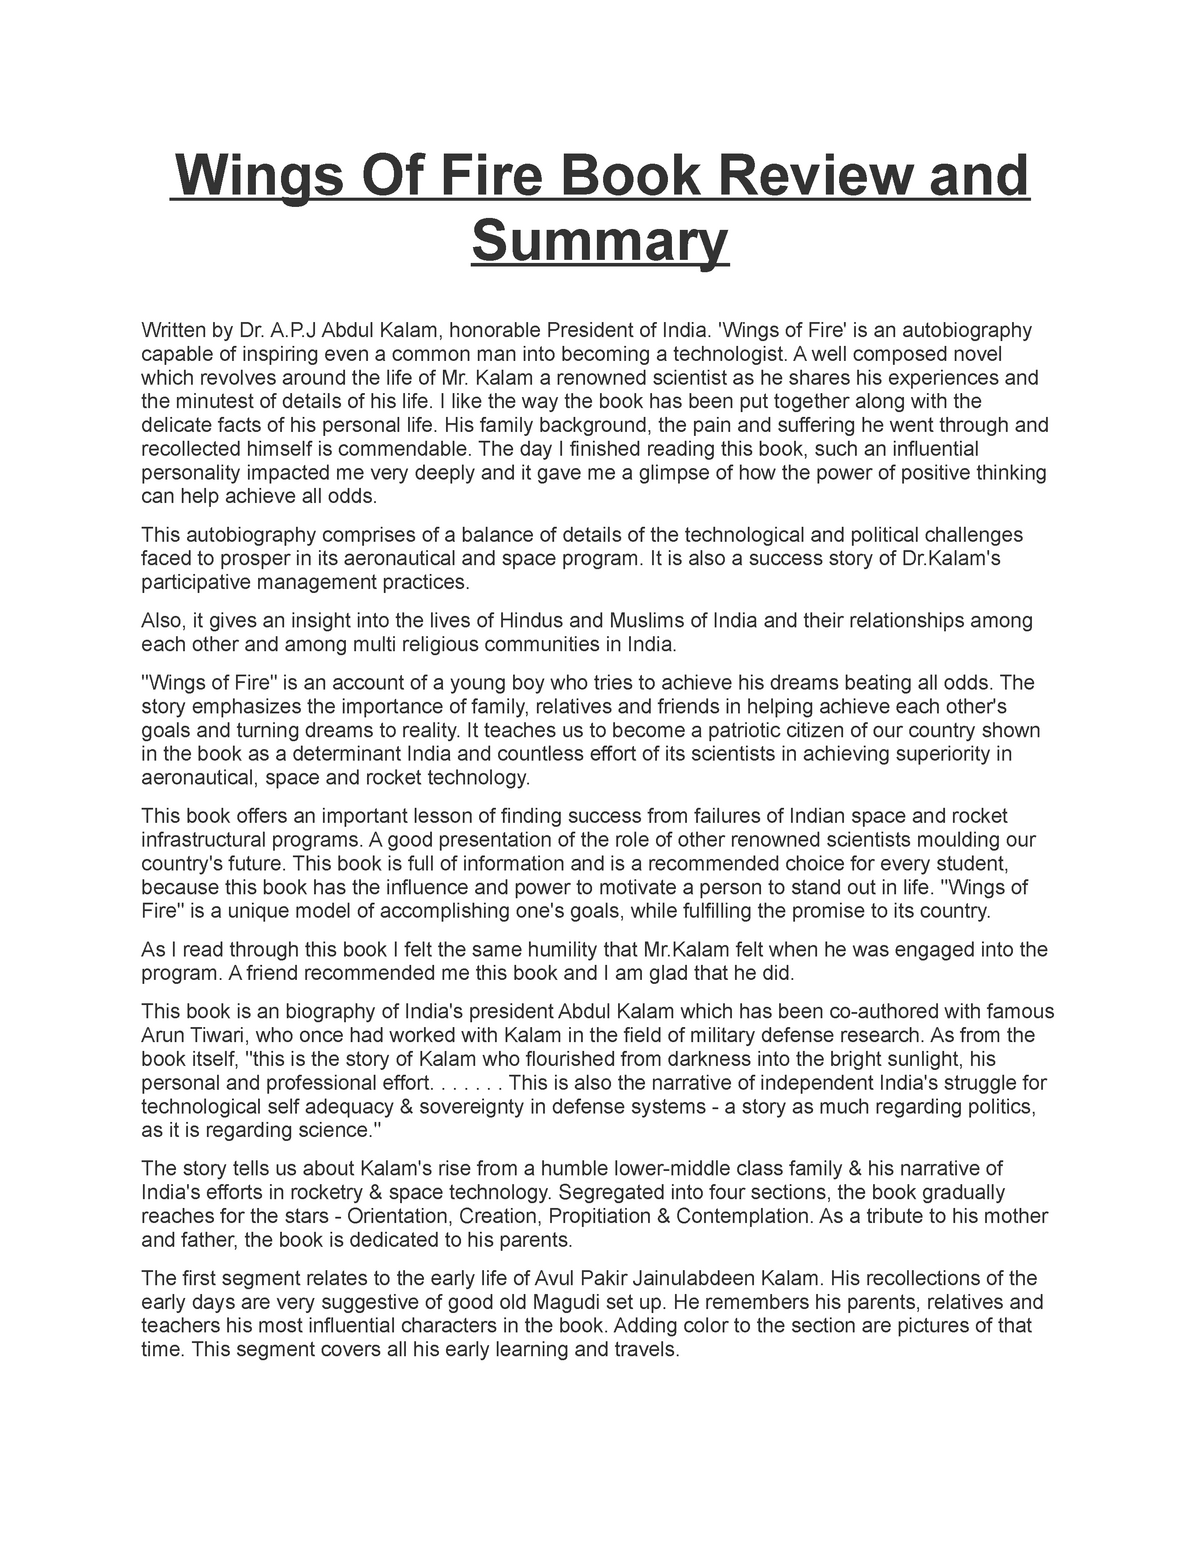 book review the wings of fire